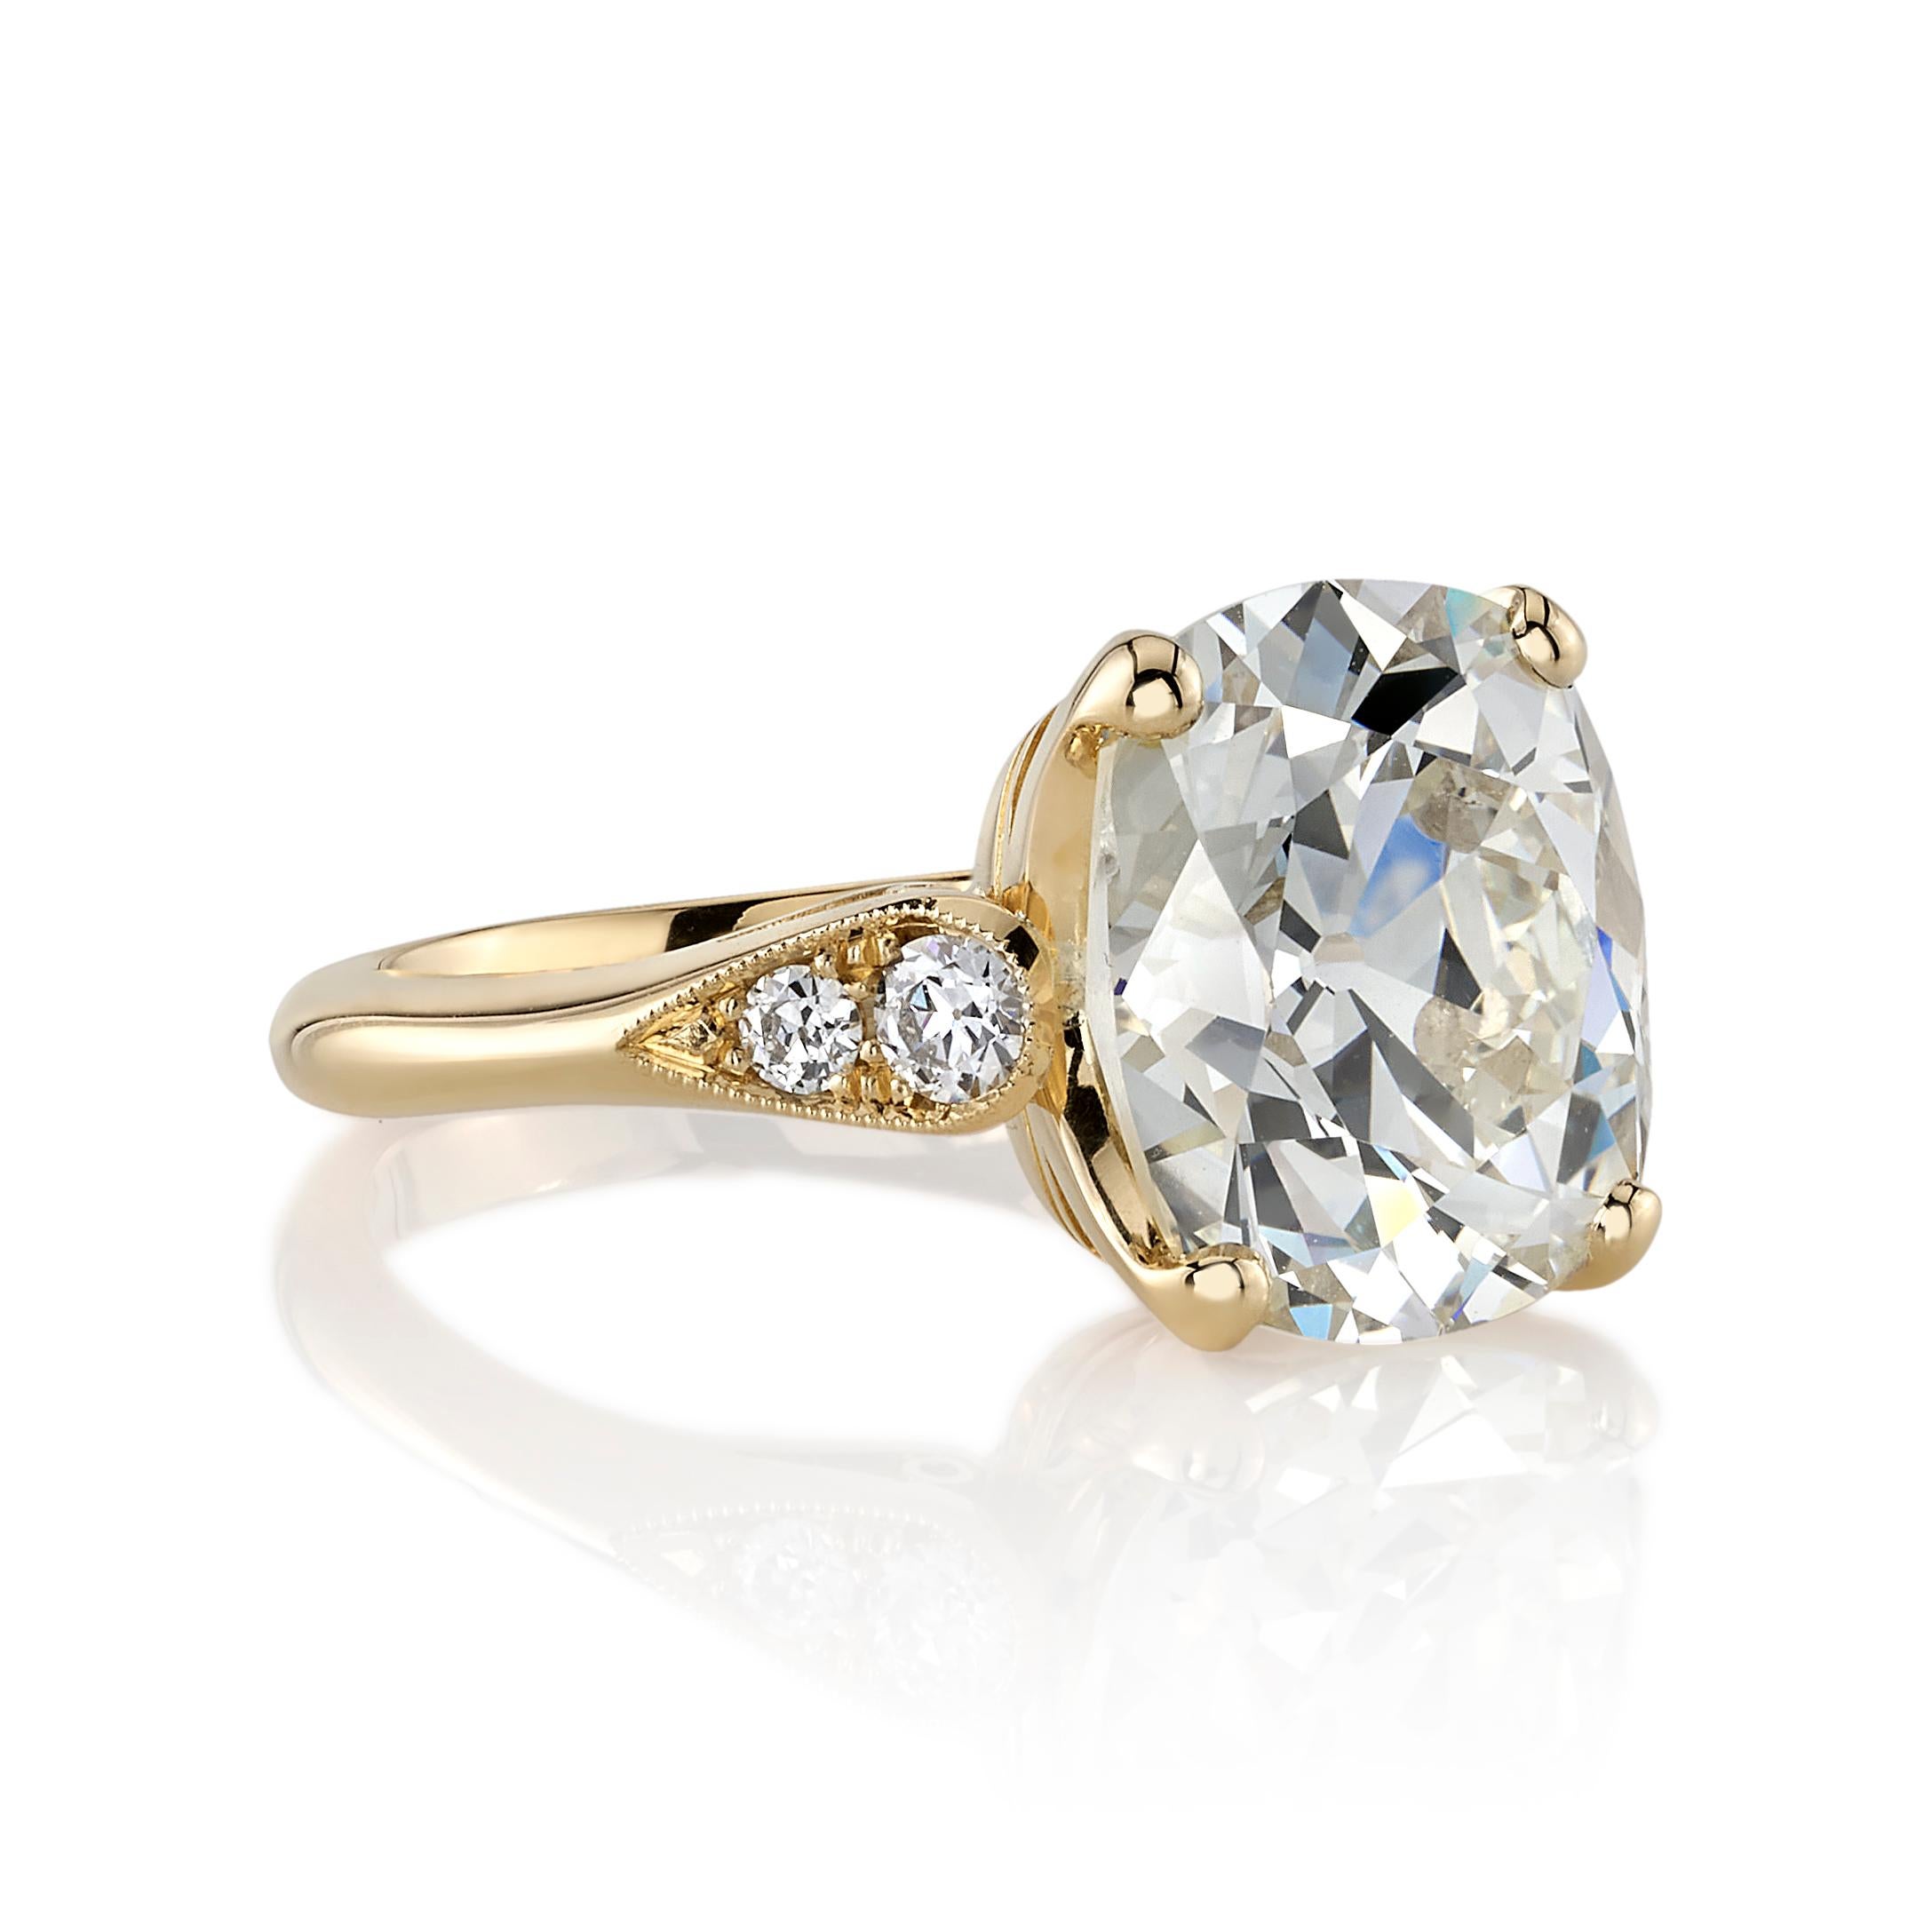 5.93ct O-P/SI1 GIA certified antique Cushion cut diamond with 0.19ctw old European cut accent diamonds set in a handcrafted 18K yellow gold mounting.

Ring is currently a size 6 and can be sized to fit. 